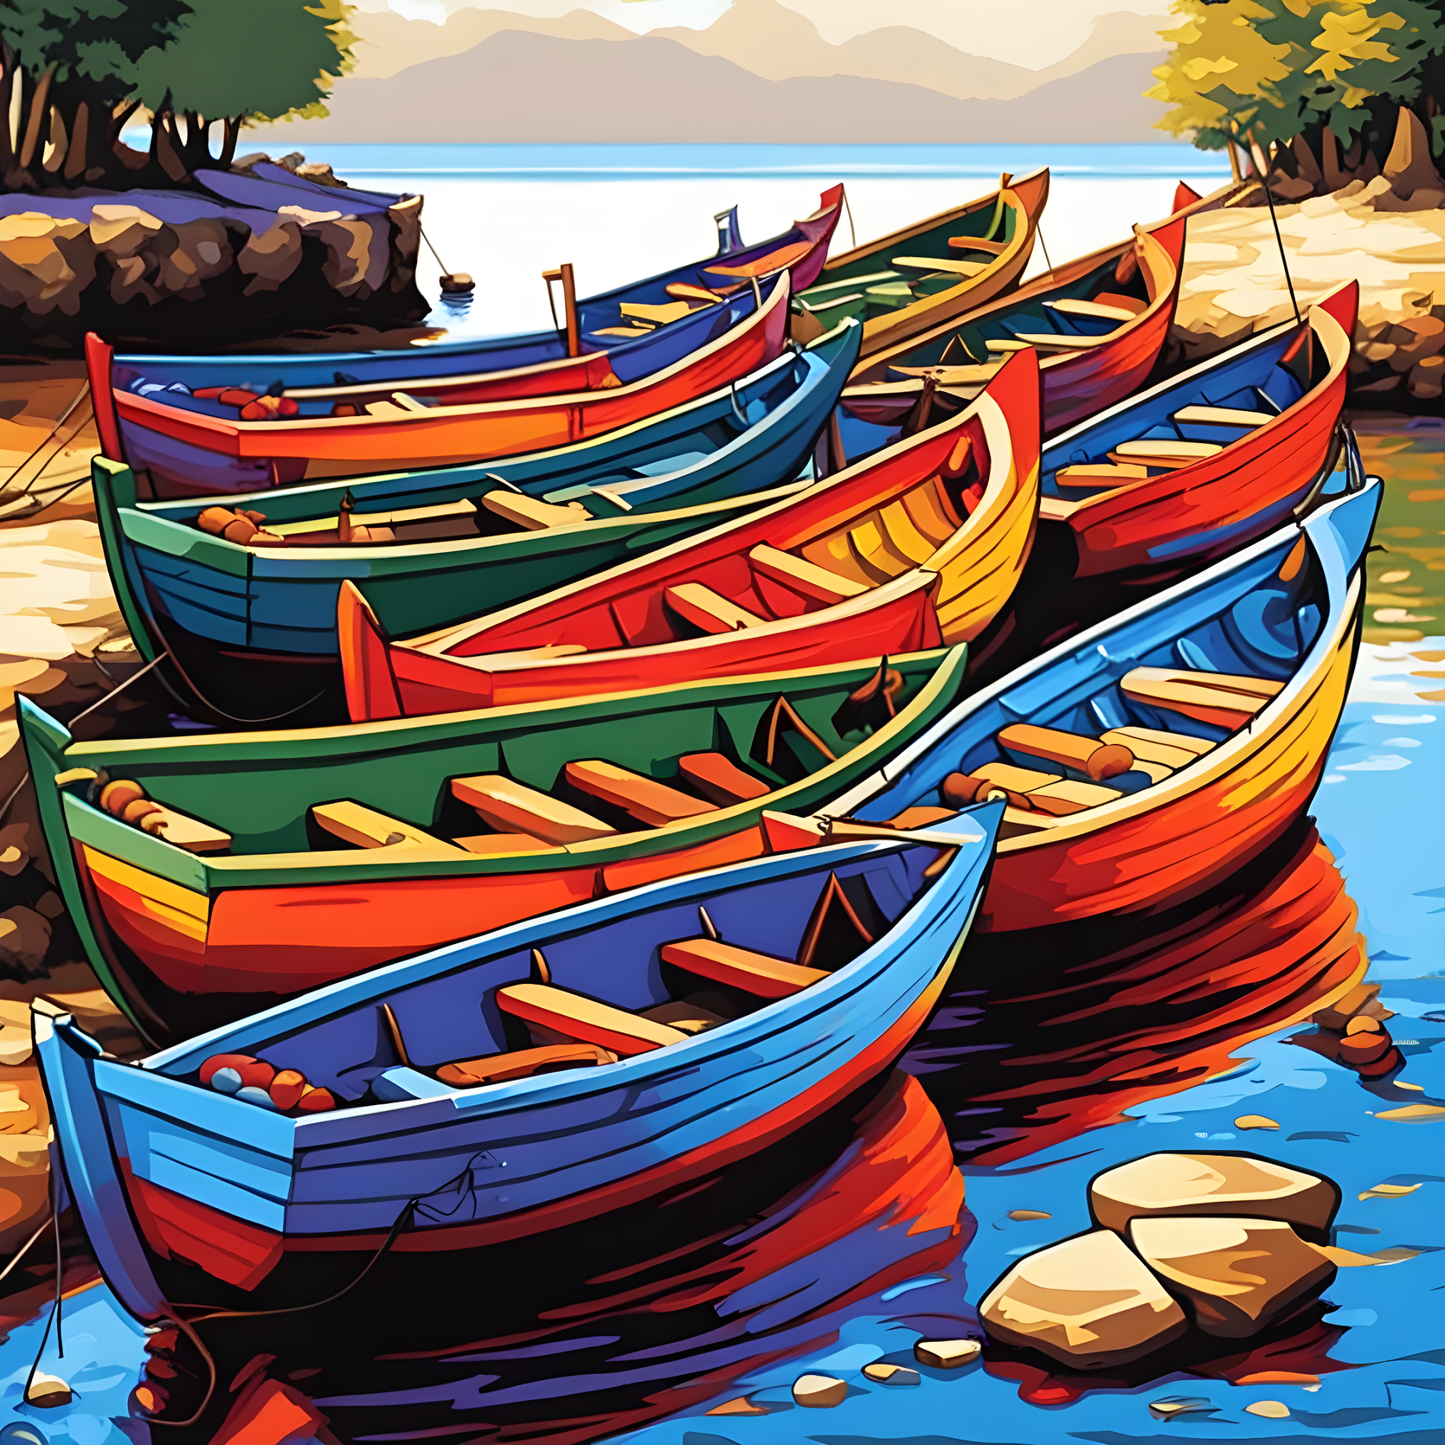 Colorful Stacked Fishing Boats - Van-Go Paint-By-Number Kit